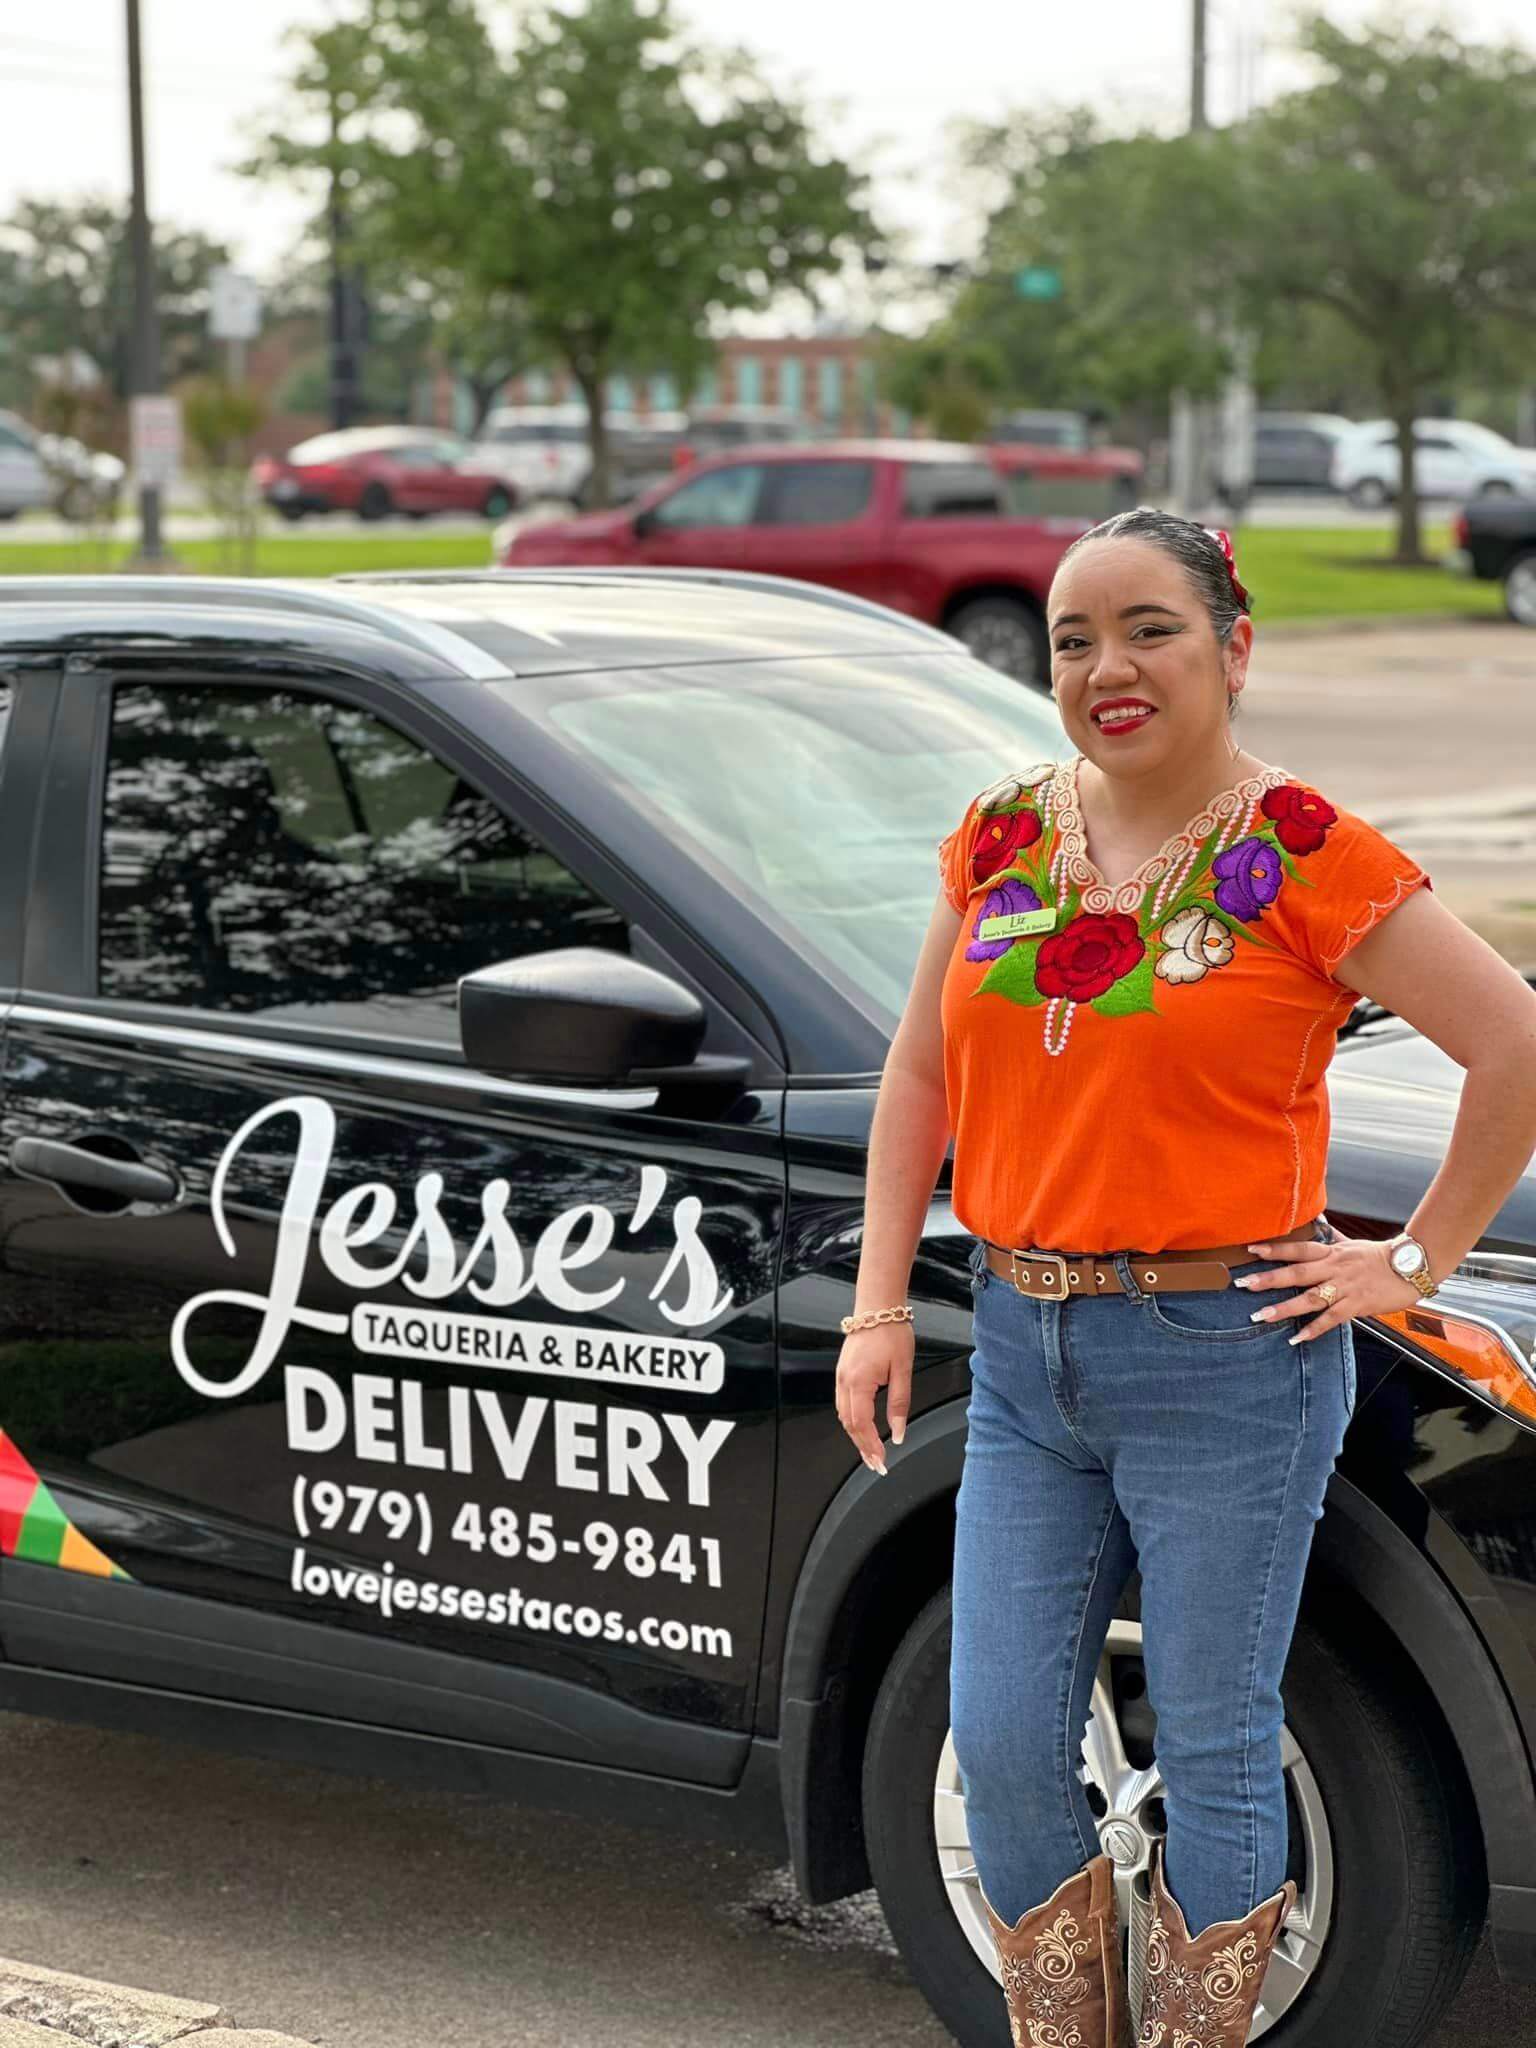 Jesse's Taqueria & Bakery delivery car